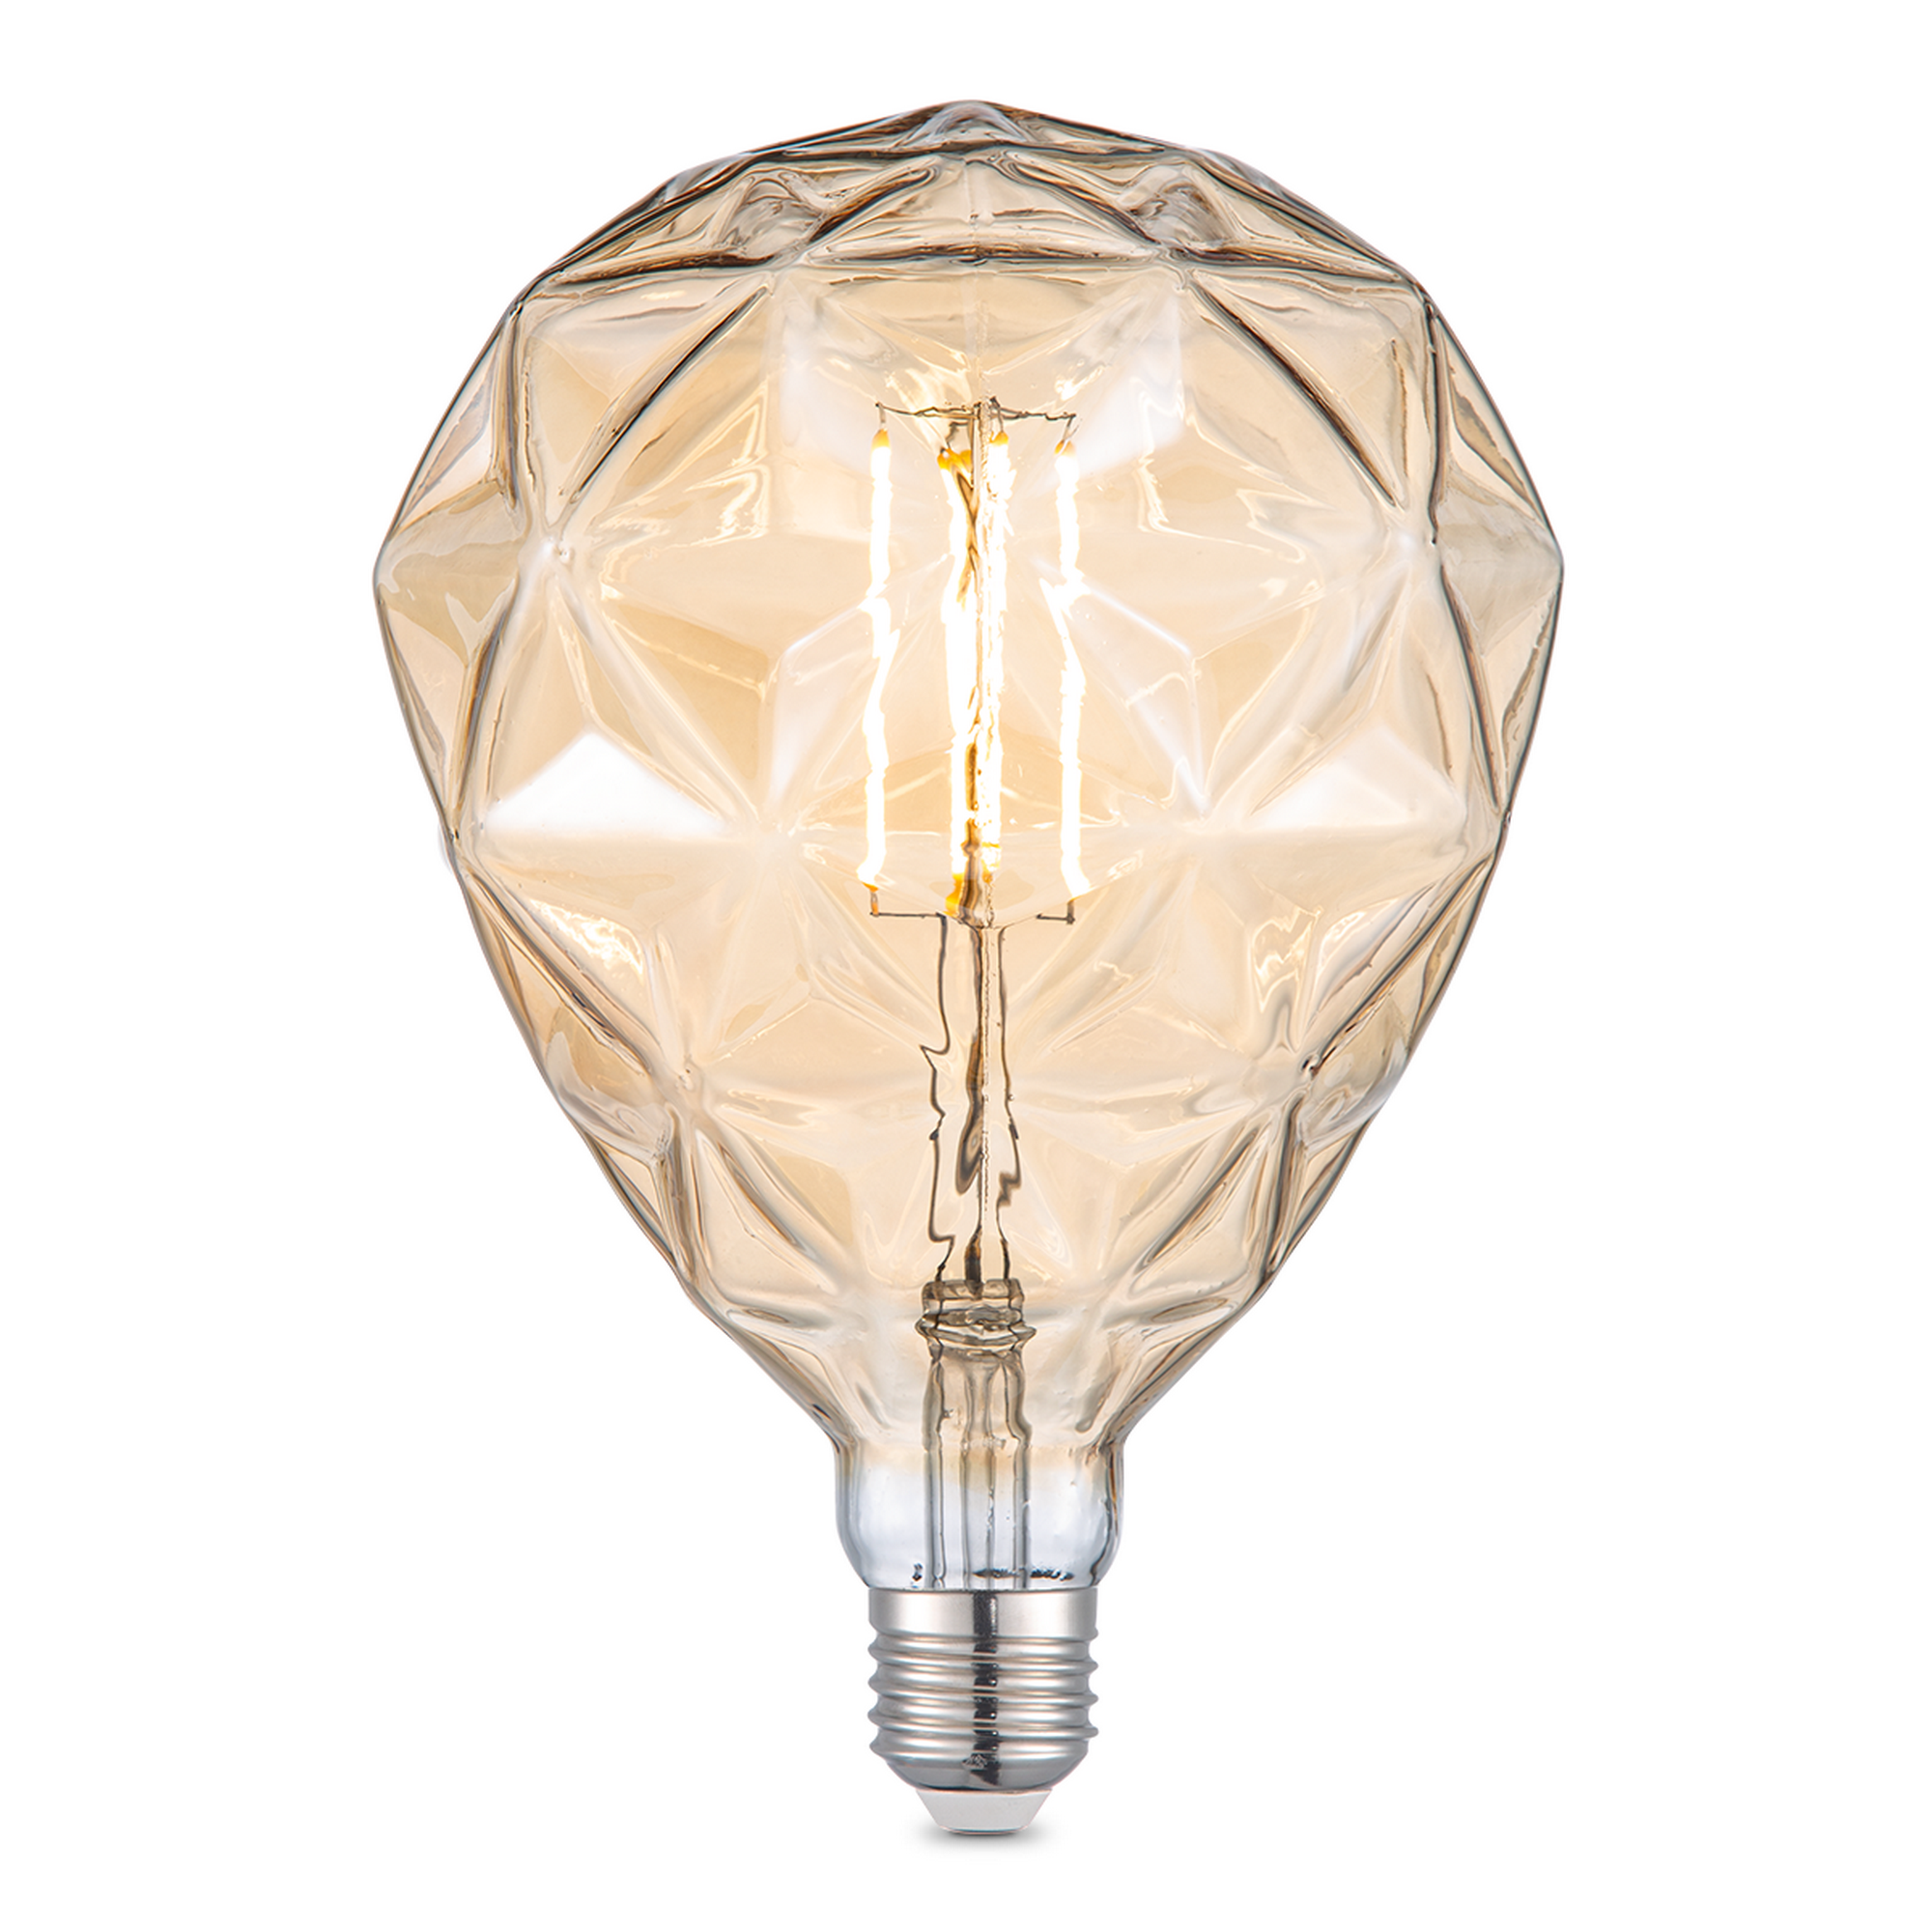 LED-Leuchtmittel 'Globe' amber 4 W 400 lm + product picture